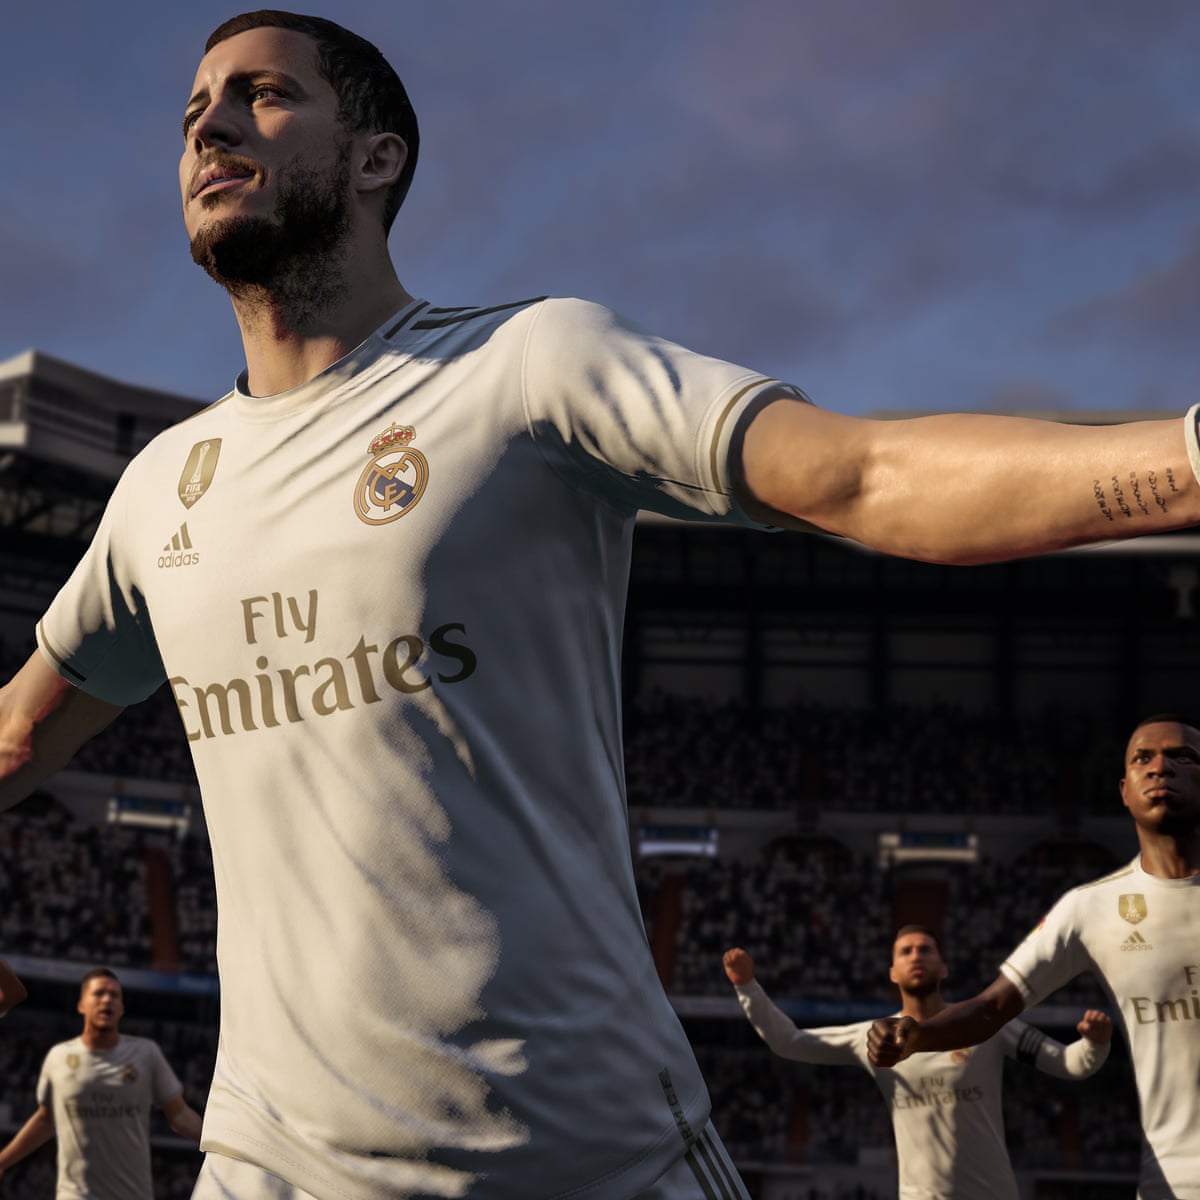 Rather worm implicit Fifa 20 review – not your typical annual update | Games | The Guardian